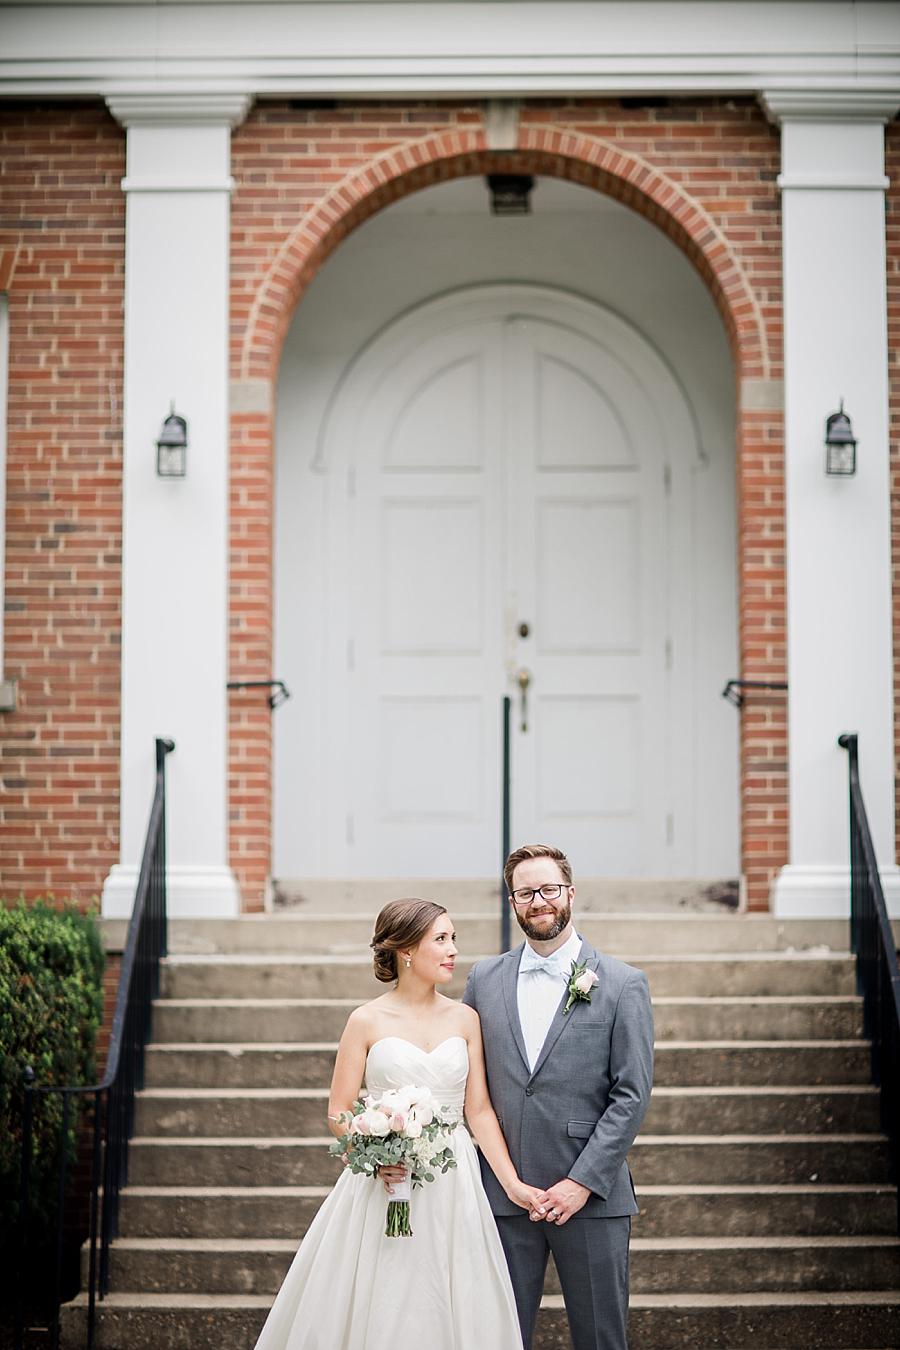 At the bottom of the steps at this Fountain City Church Wedding by Knoxville Wedding Photographer, Amanda May Photos.